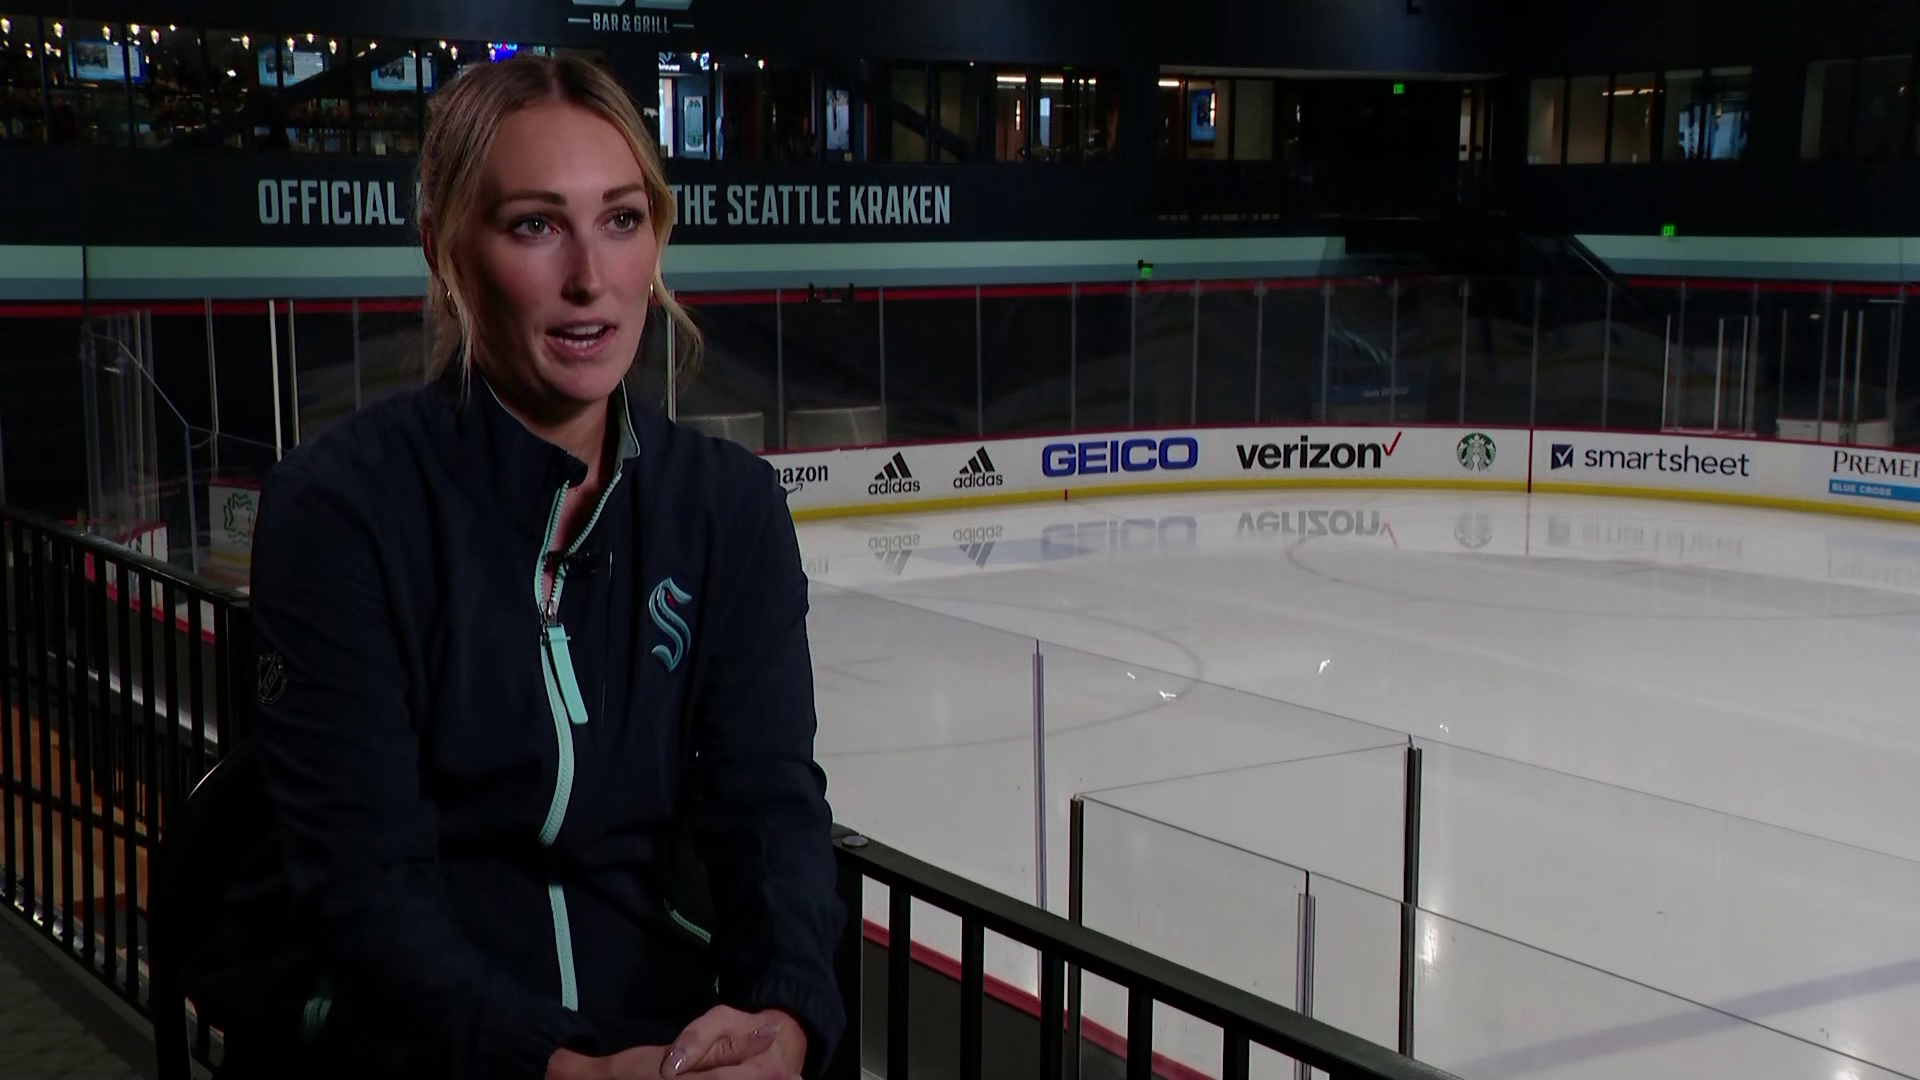 The Seattle Kraken hired the first full-time female coach in the NHL on Wednesday, welcoming Jessica Campbell as assistant coach.